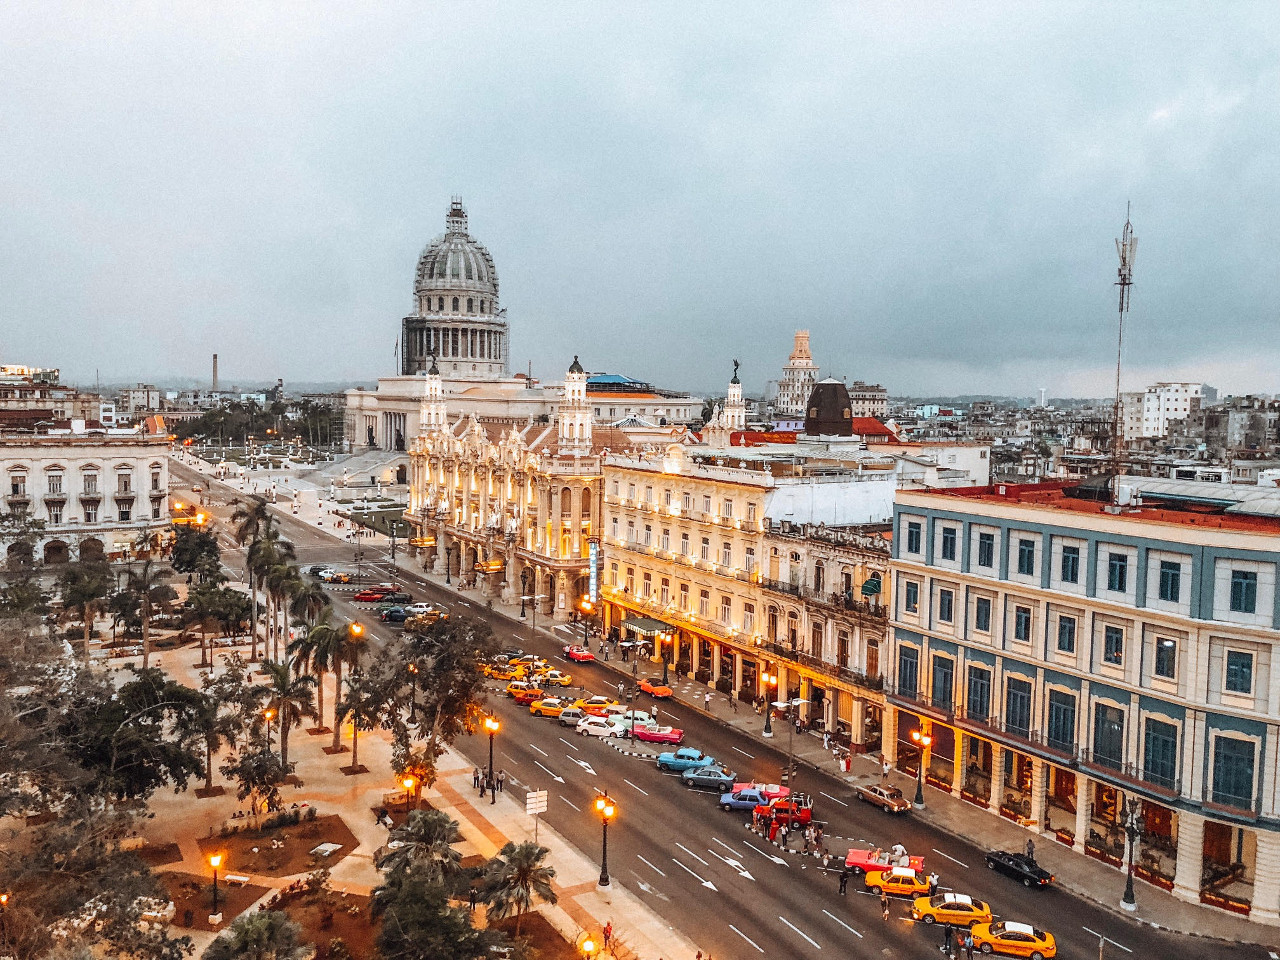 The top 10 things to know before traveling to Cuba. Cuba safety, Cuba tourism, and Cuba tips included #cubatips #cubafacts #havanatips #havanafacts #cubathingstoknow 